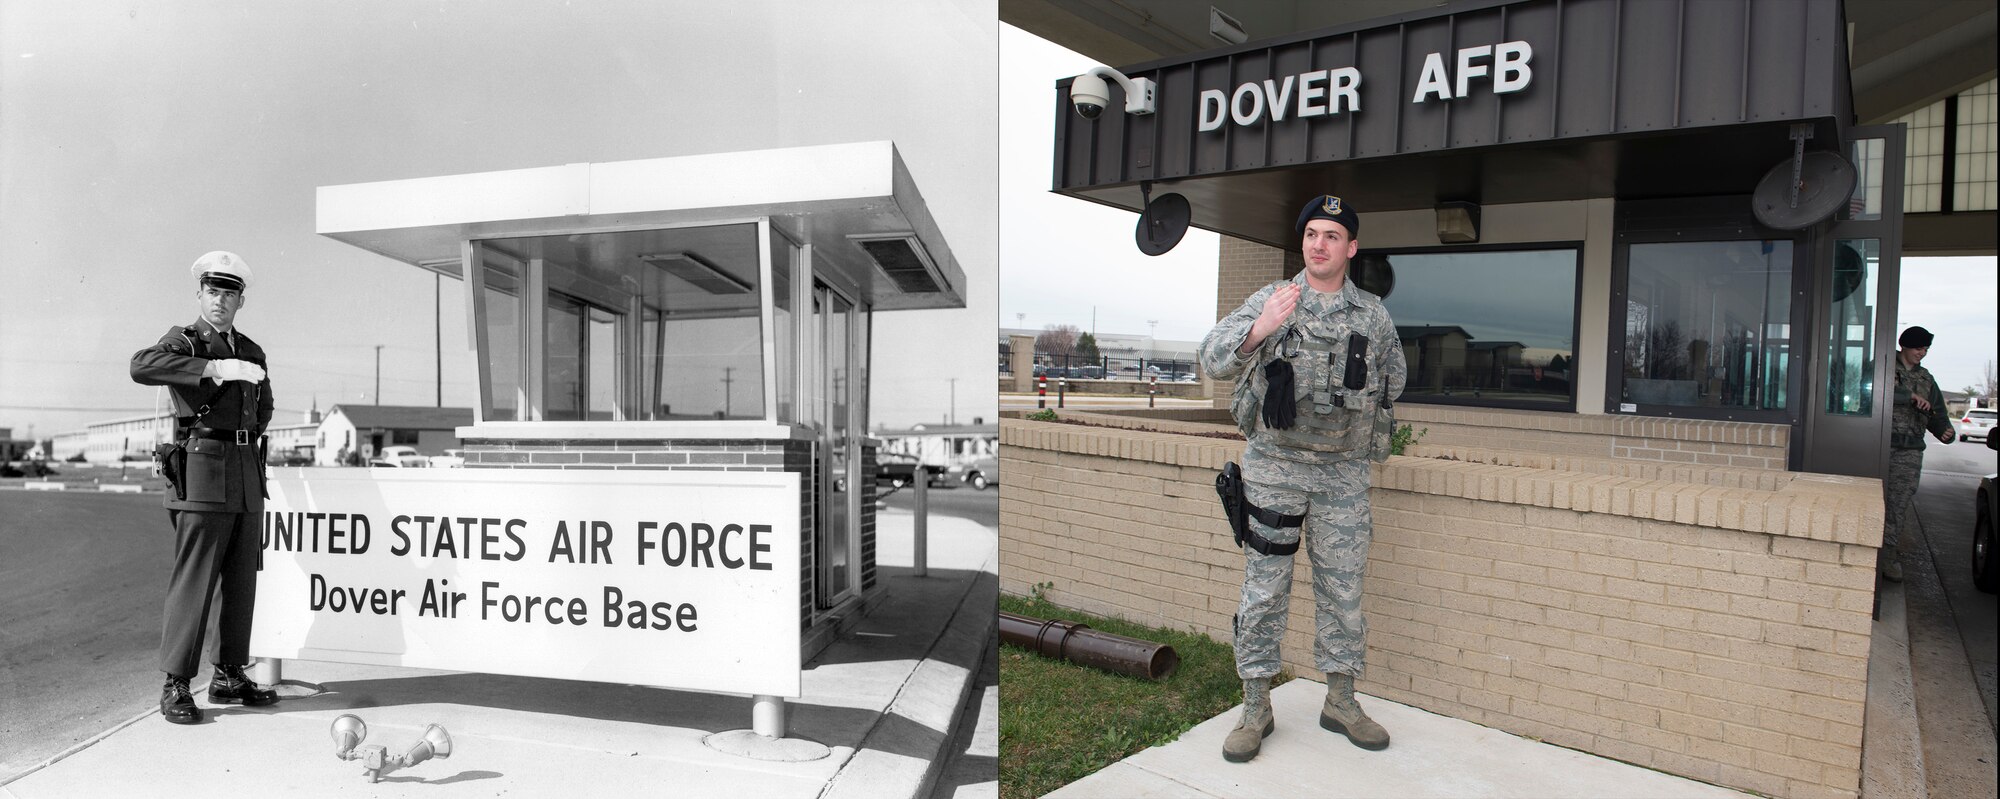 Circa 1960 versus 2016: The Dover Air Force Base main gate in 1960 with an Air Policeman versus the main in 2016 with Senior Airman Jordan Mehl, 436th Security Forces Squadron defender. (U.S. Air Force photo illustration by Senior Airman Zachary Cacicia)